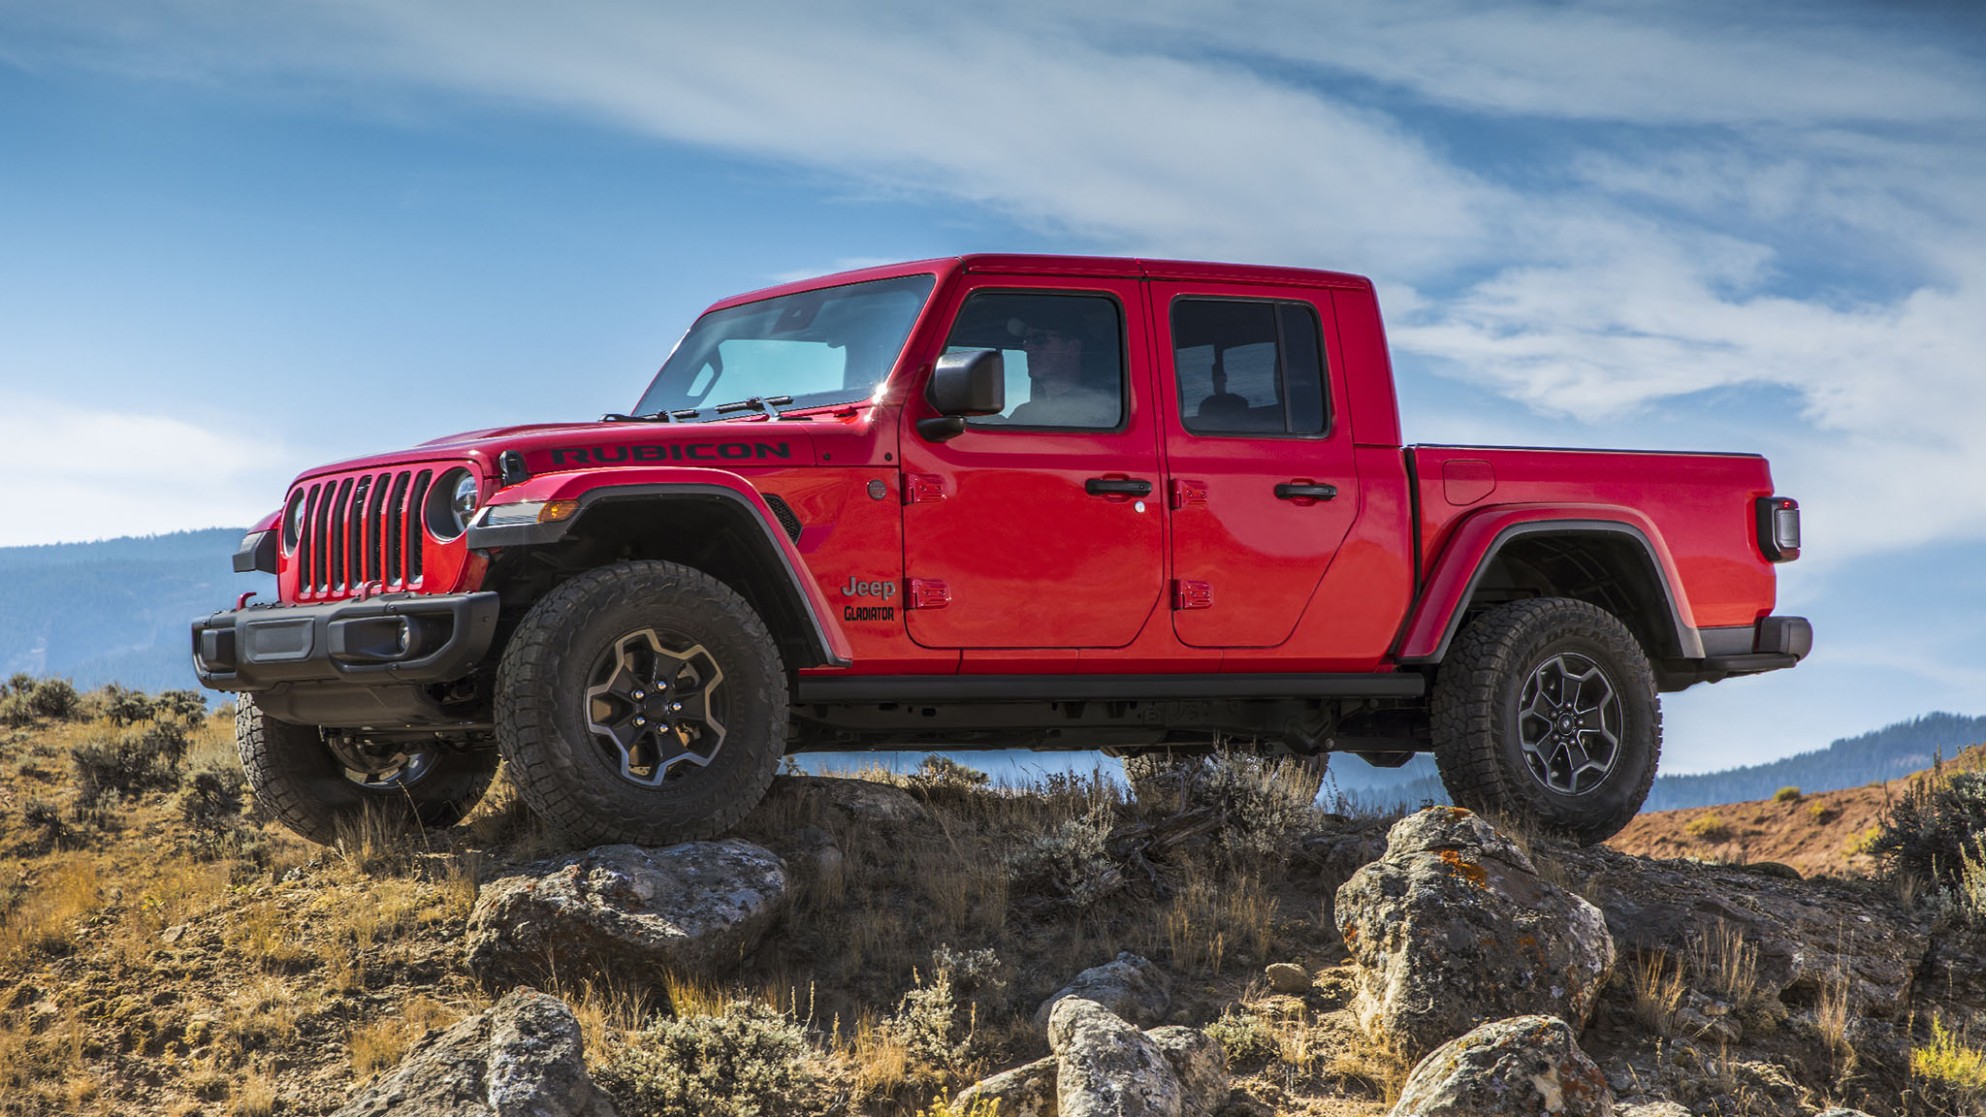 5 Jeep Gladiator Diesel Now Available to Order - Jeep Pickup 2021 Specs